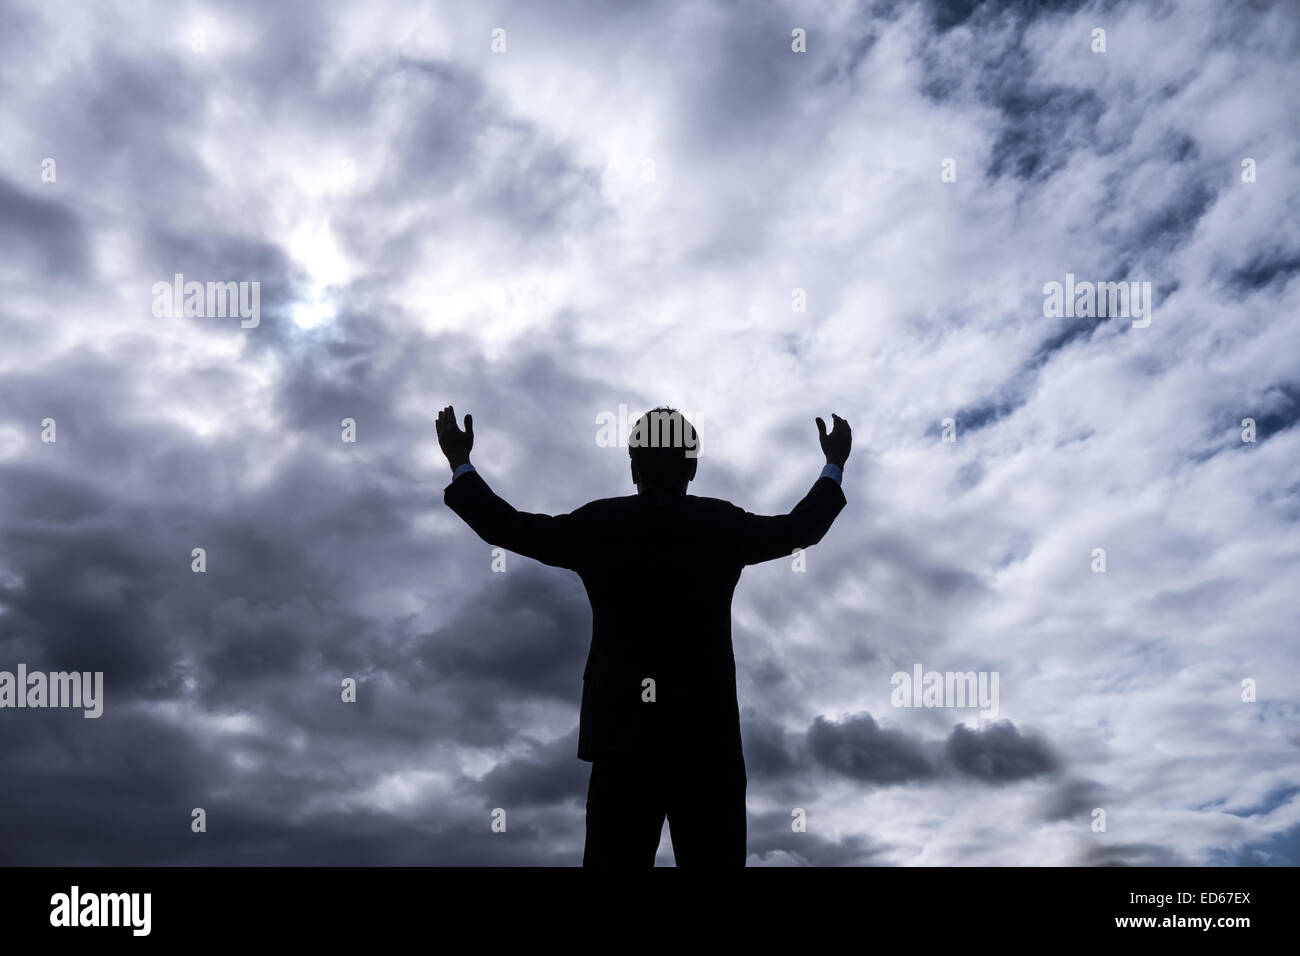 businessman upholding arms and stormy clouds Stock Photo